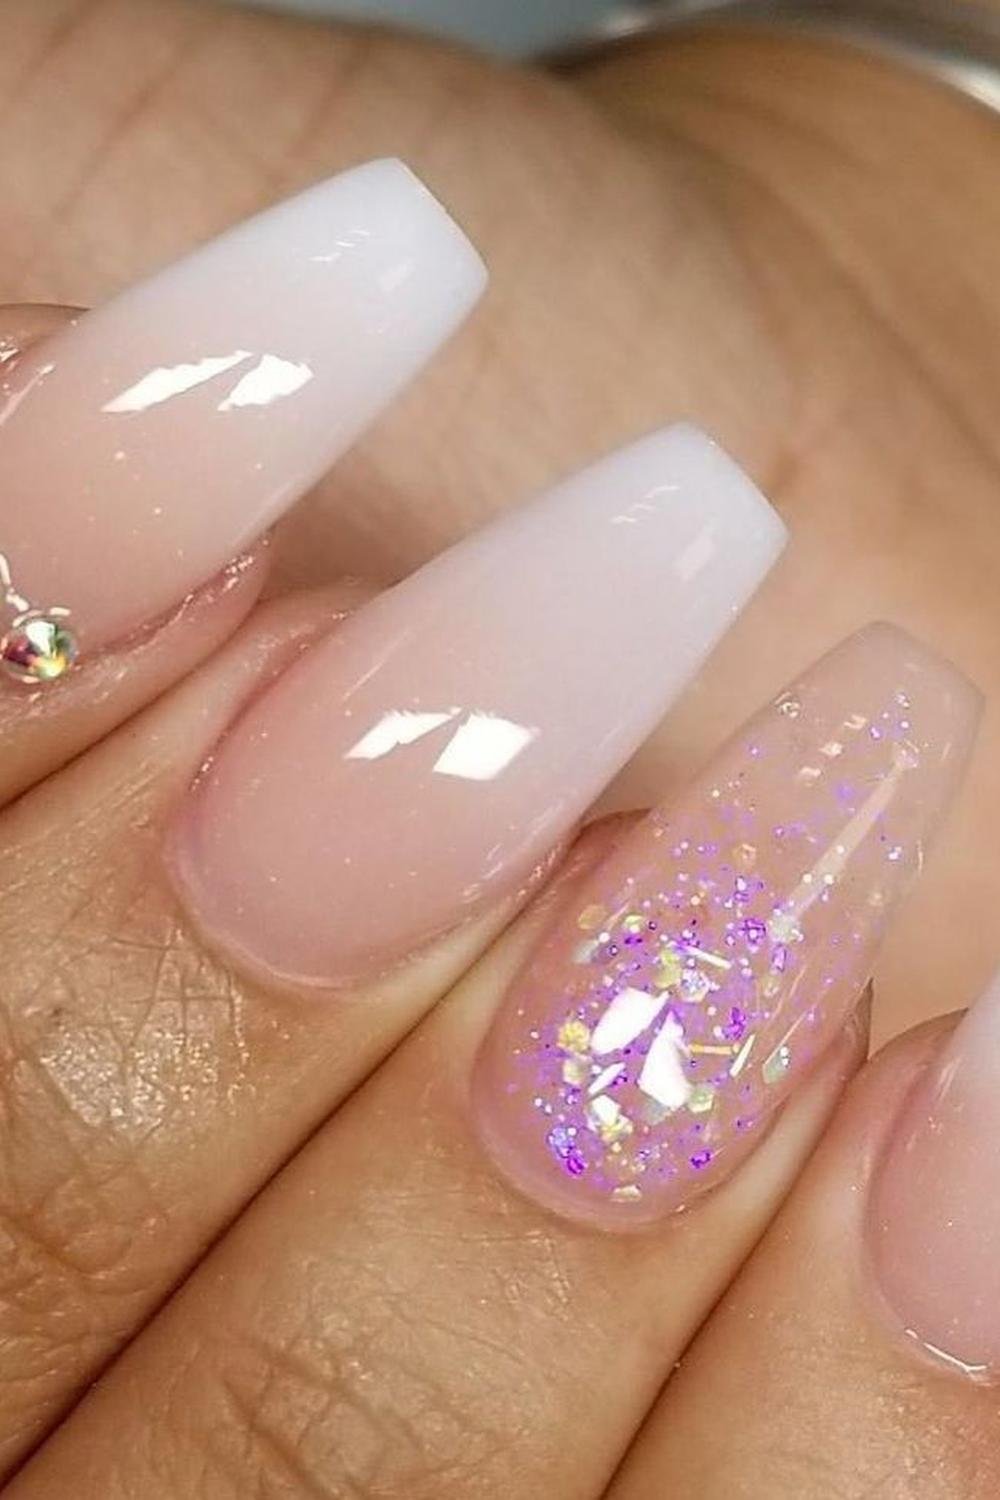 30 - Picture of Ballerina Nails